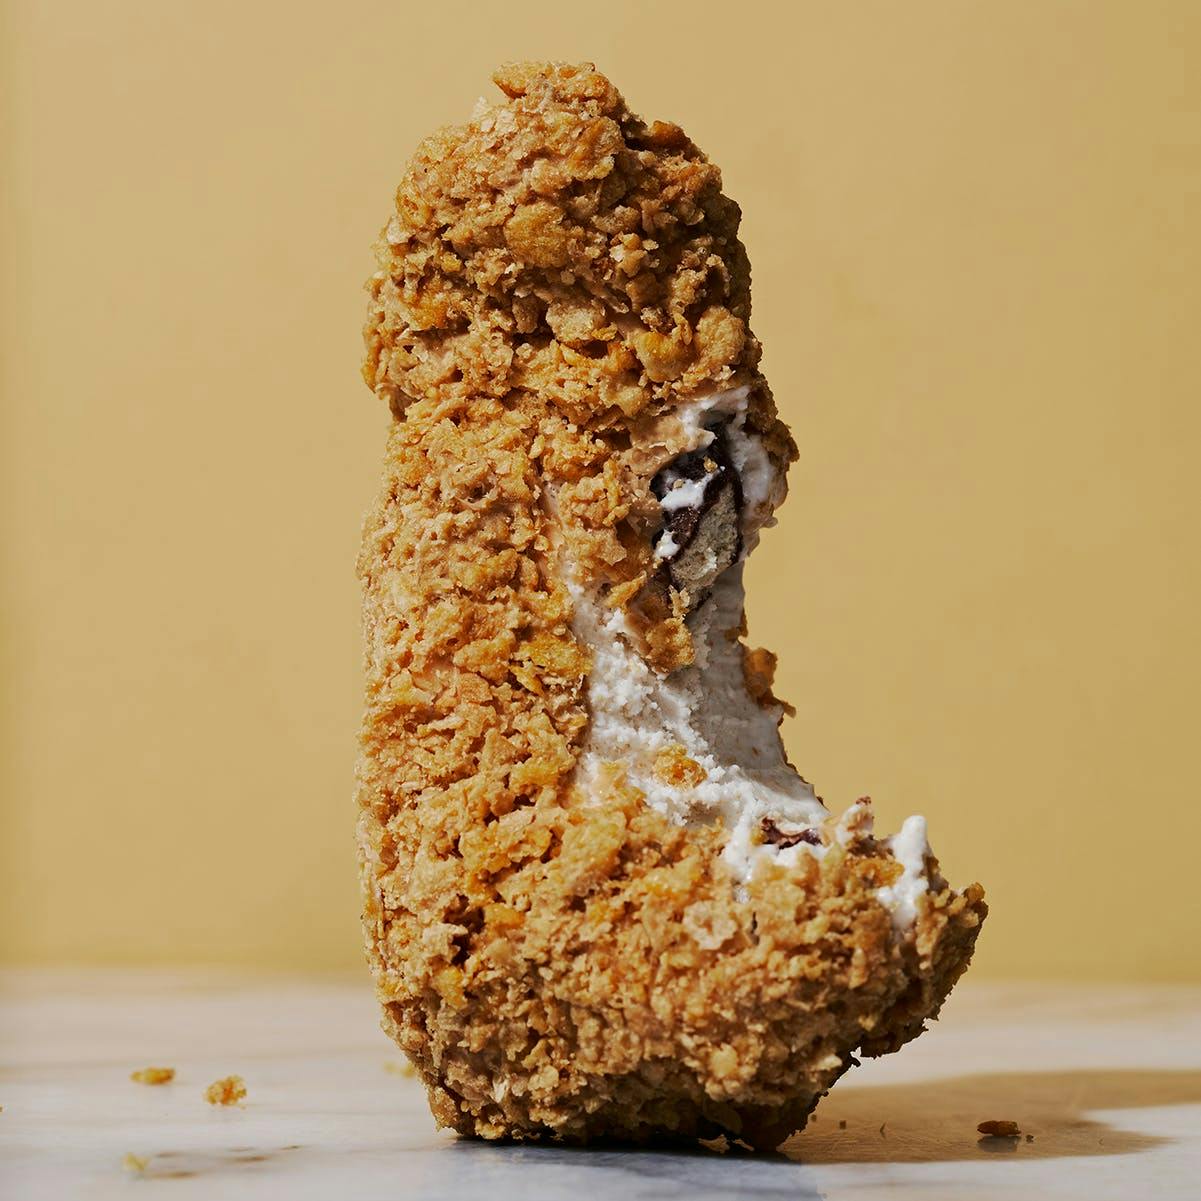 Don't Believe Your Eyes. That's Ice Cream, Not Fried Chicken